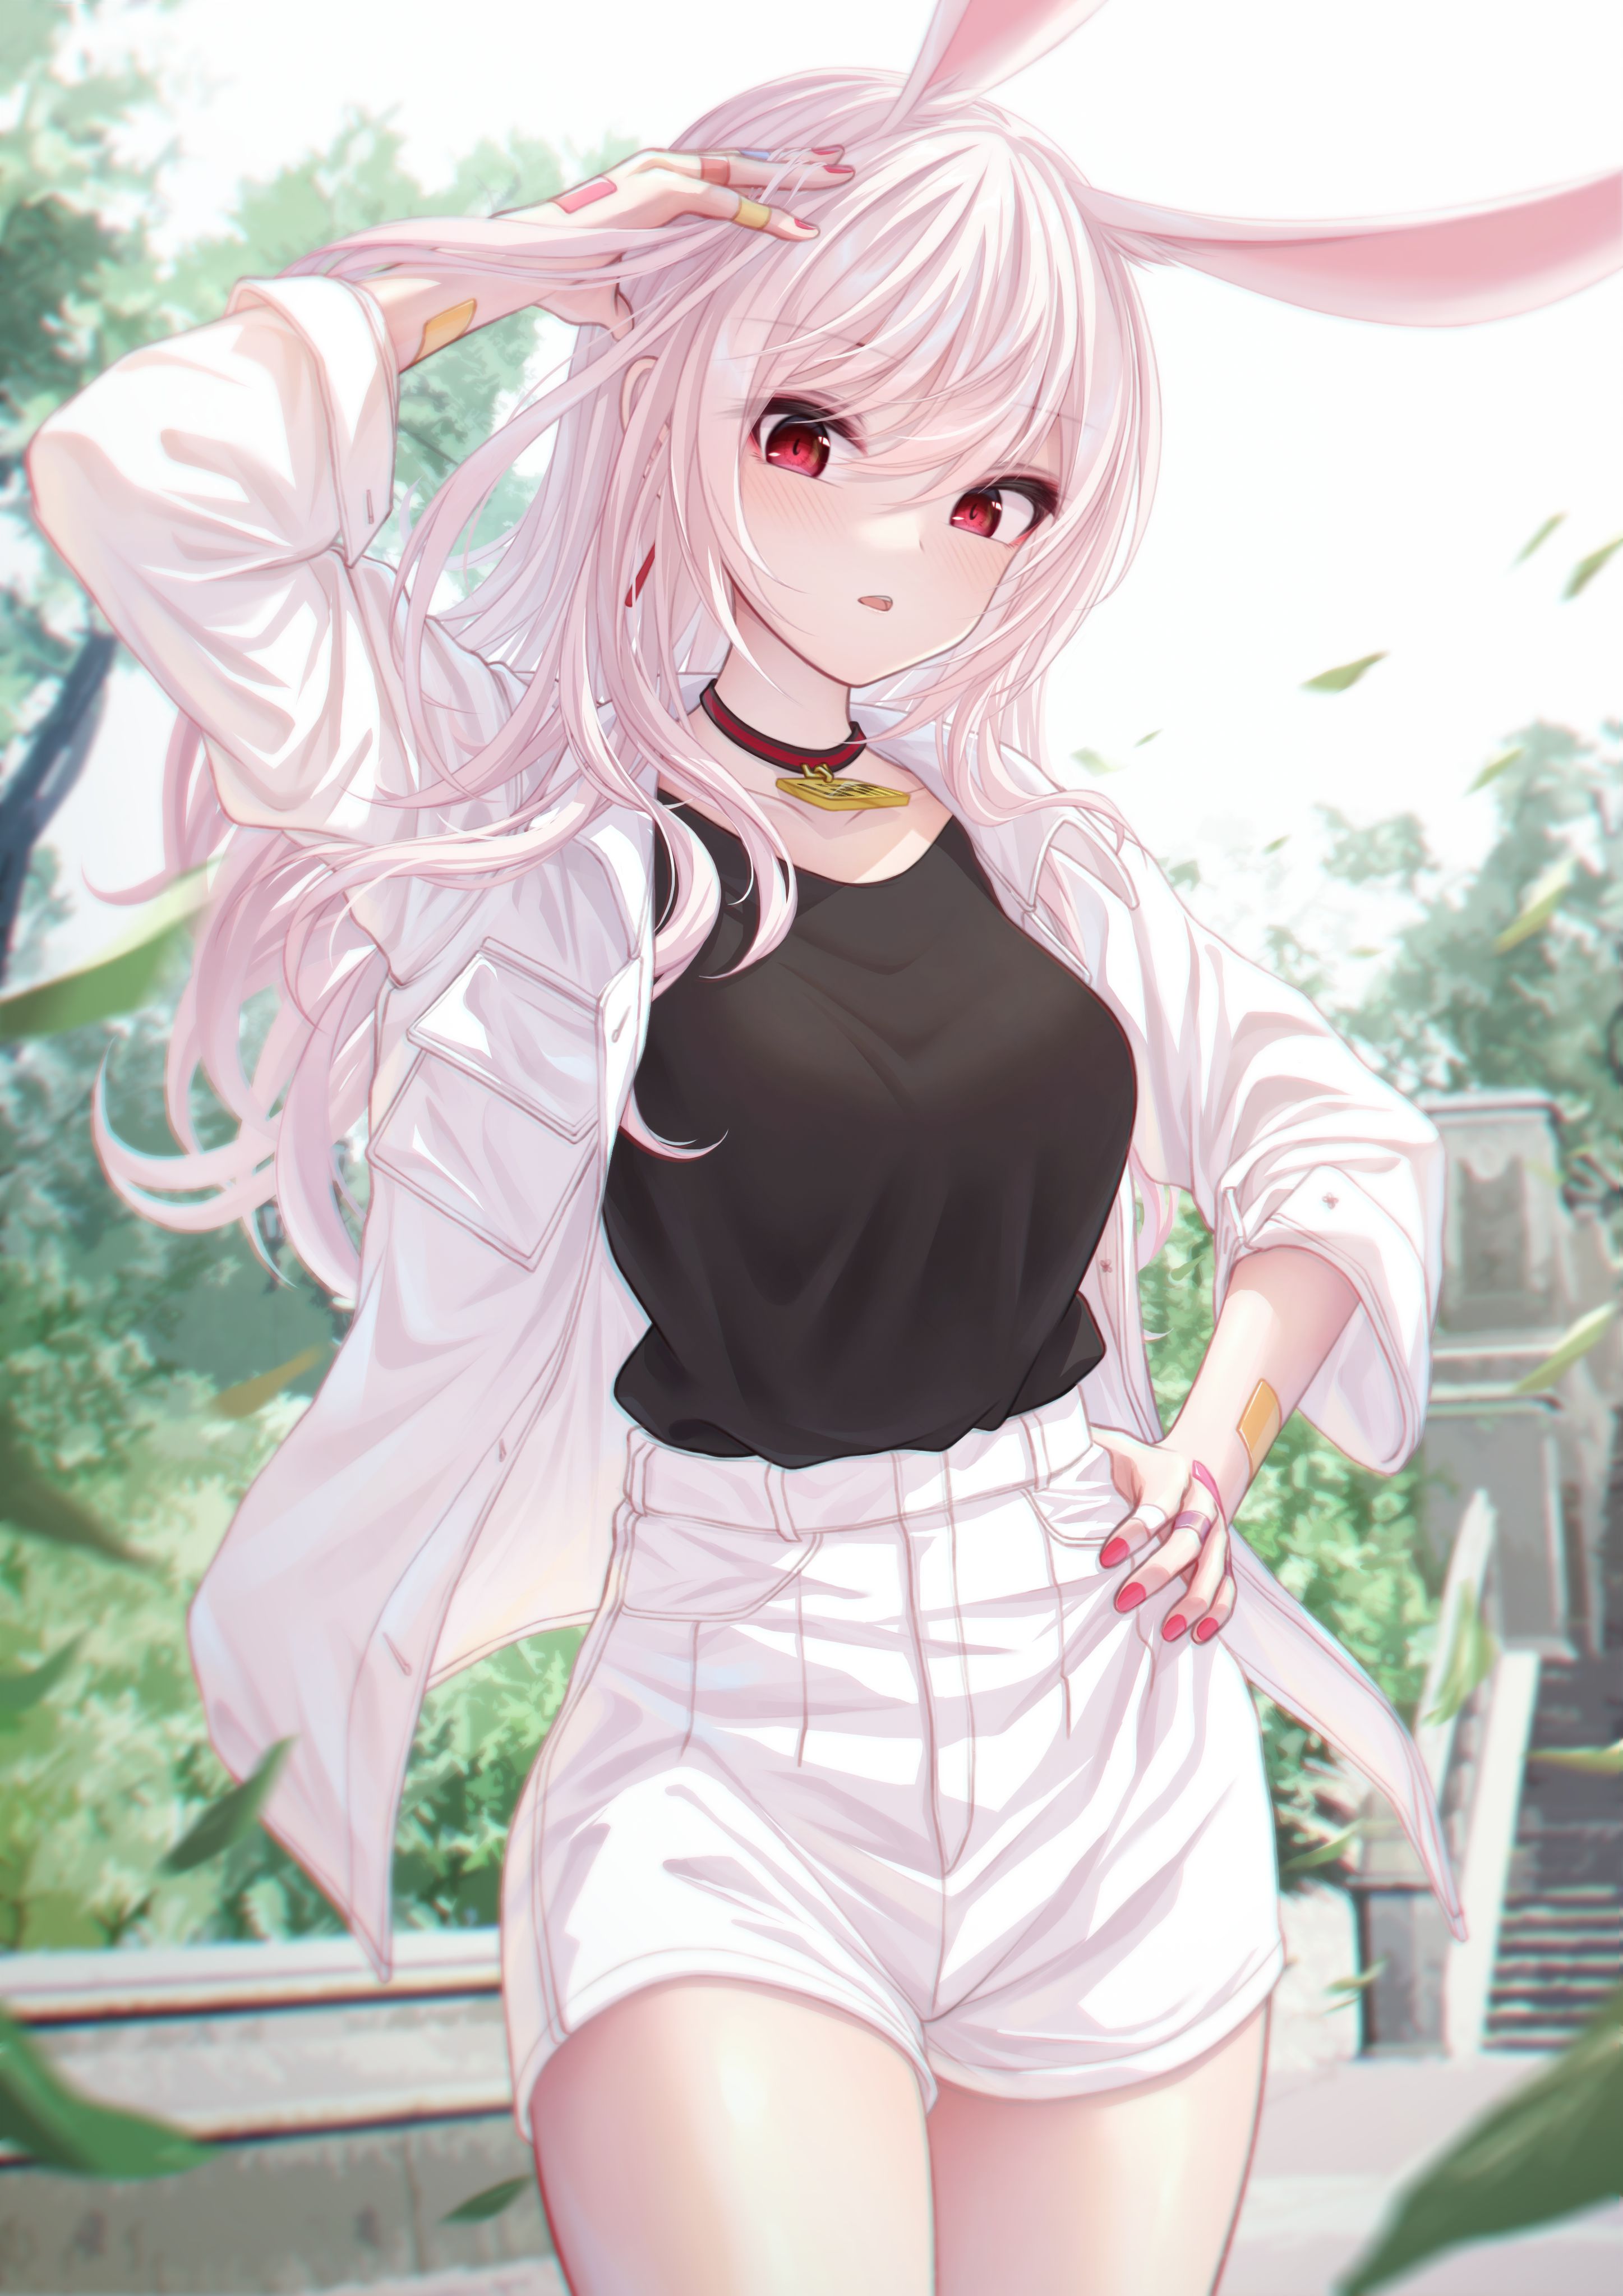 Anime Girls Bunny Girl Bae C Vertical Collar Looking At Viewer Long Hair Stairs Leaves 2894x4093